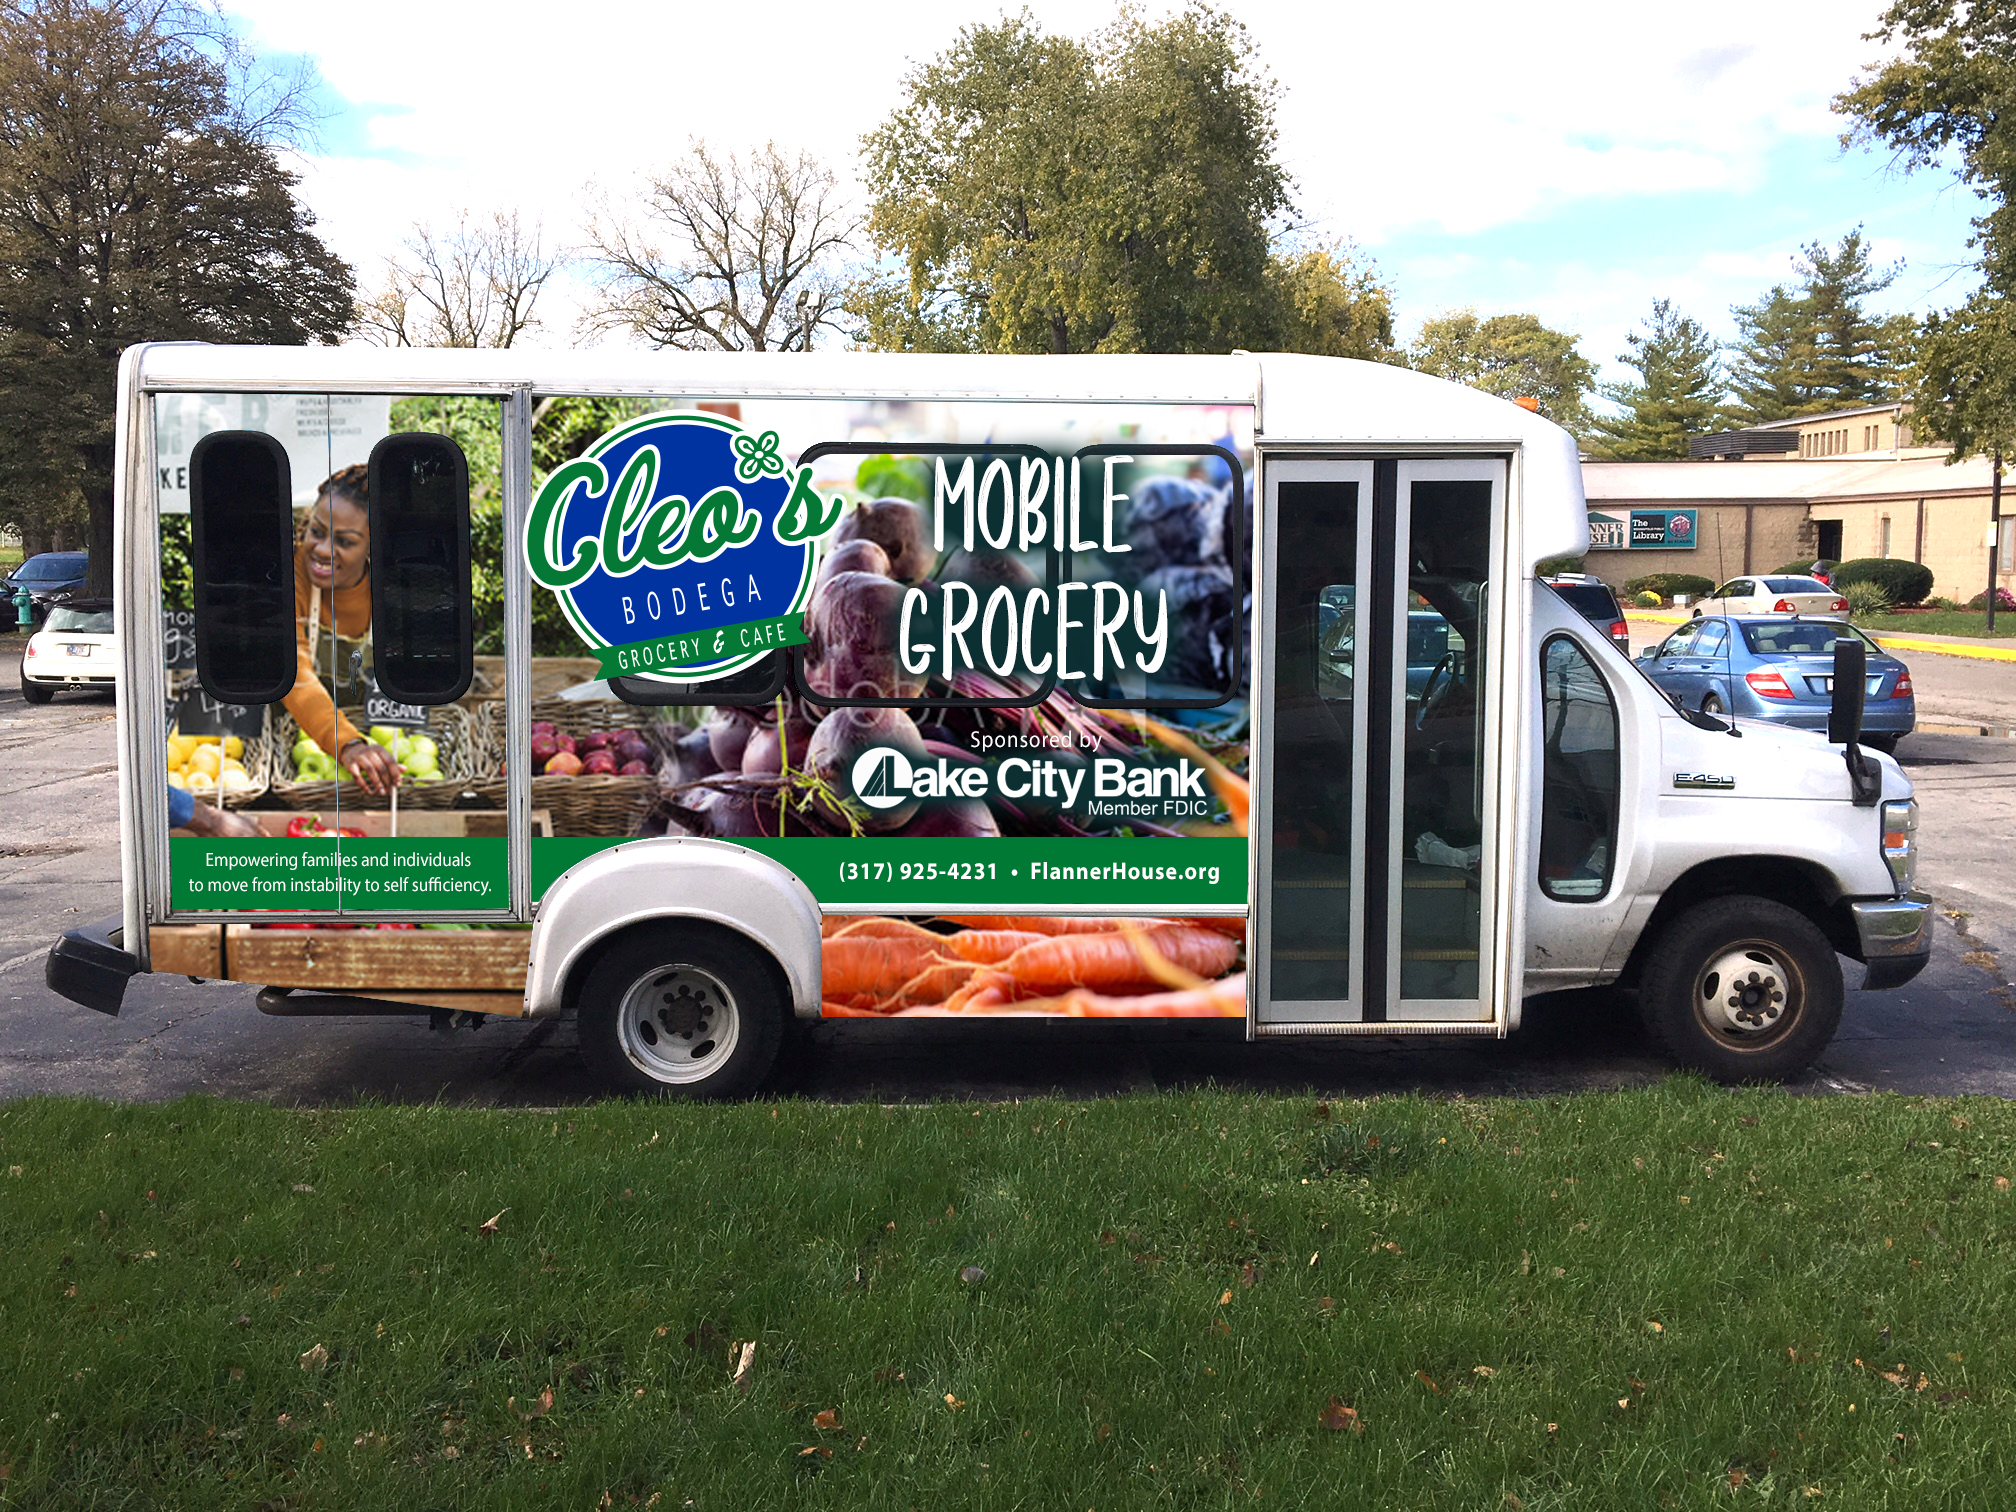 Cleo's mobile grocery truck